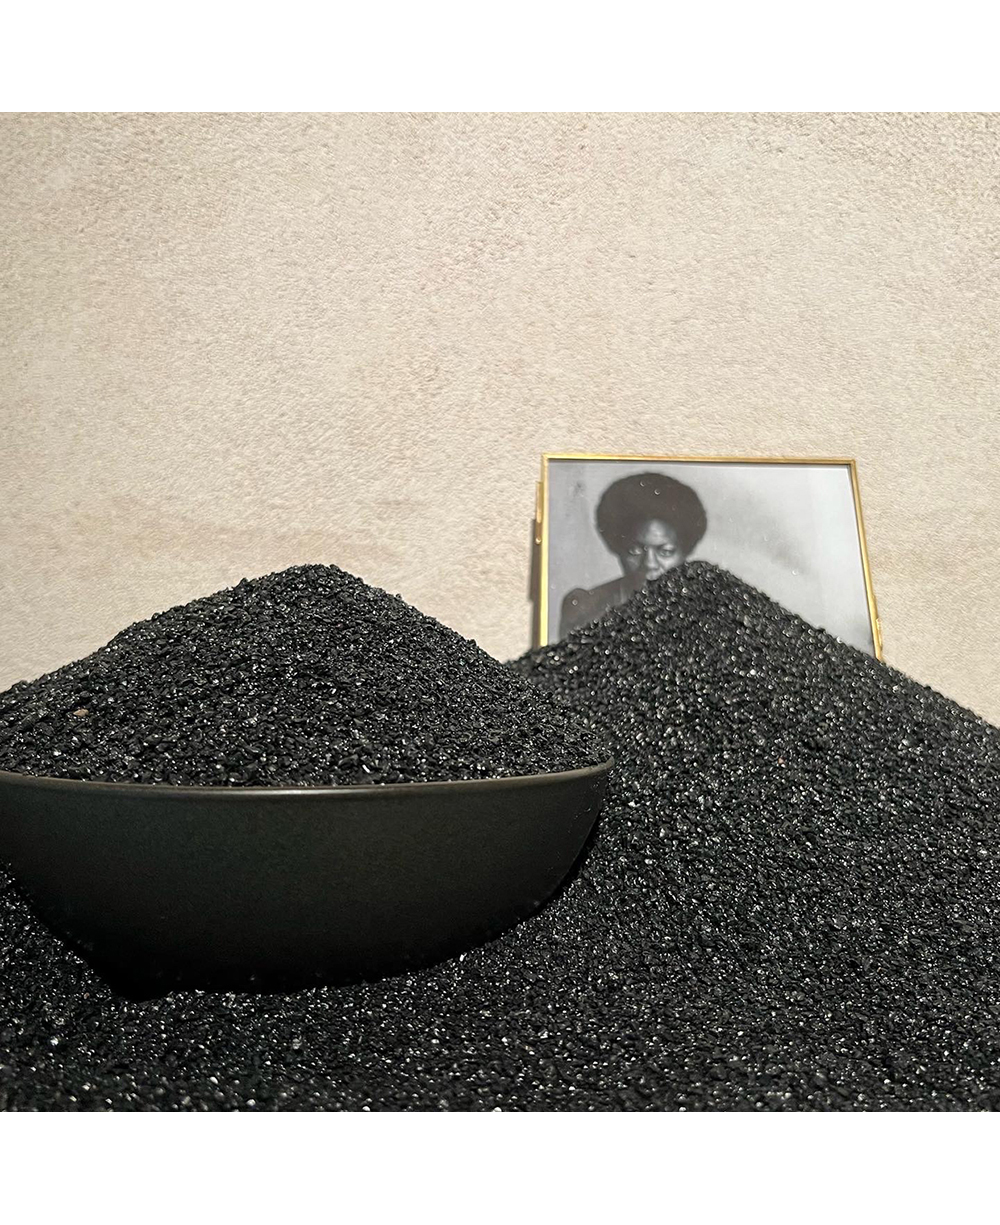 A bowl overflowing with black sand partially covers a framed photo of a dark skinned woman 